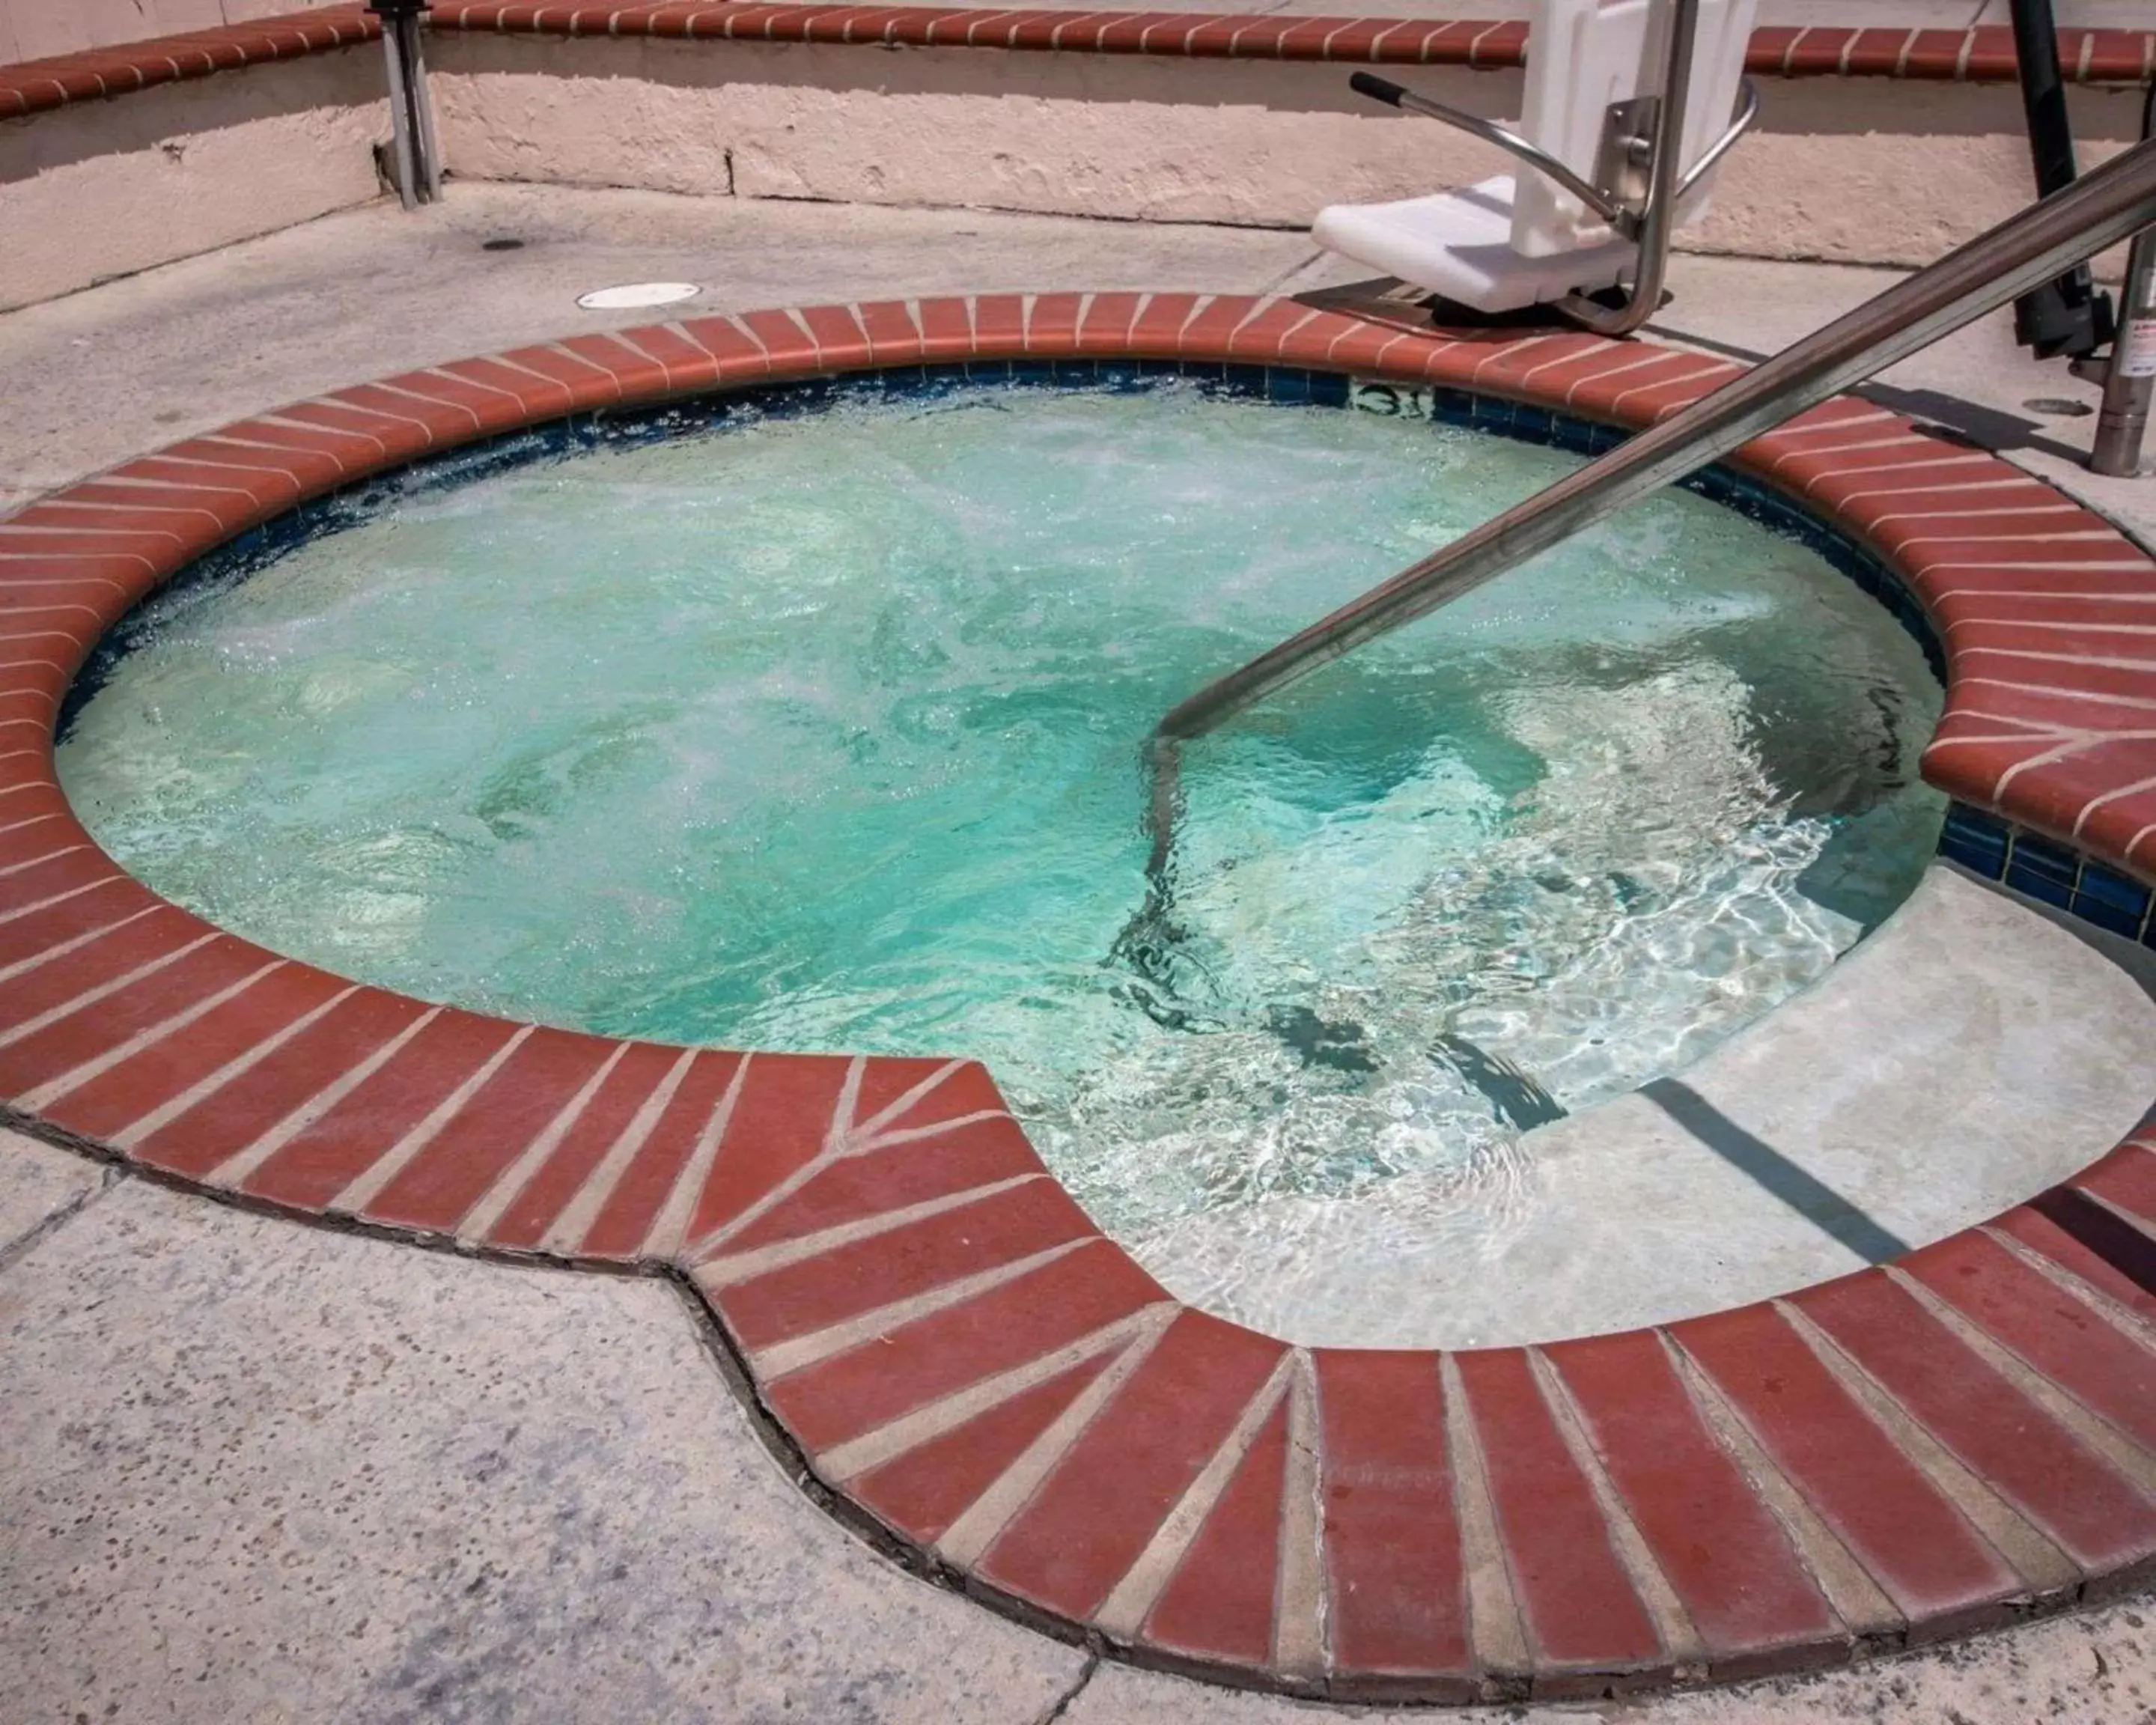 On site, Swimming Pool in Quality Inn Temecula Valley Wine Country